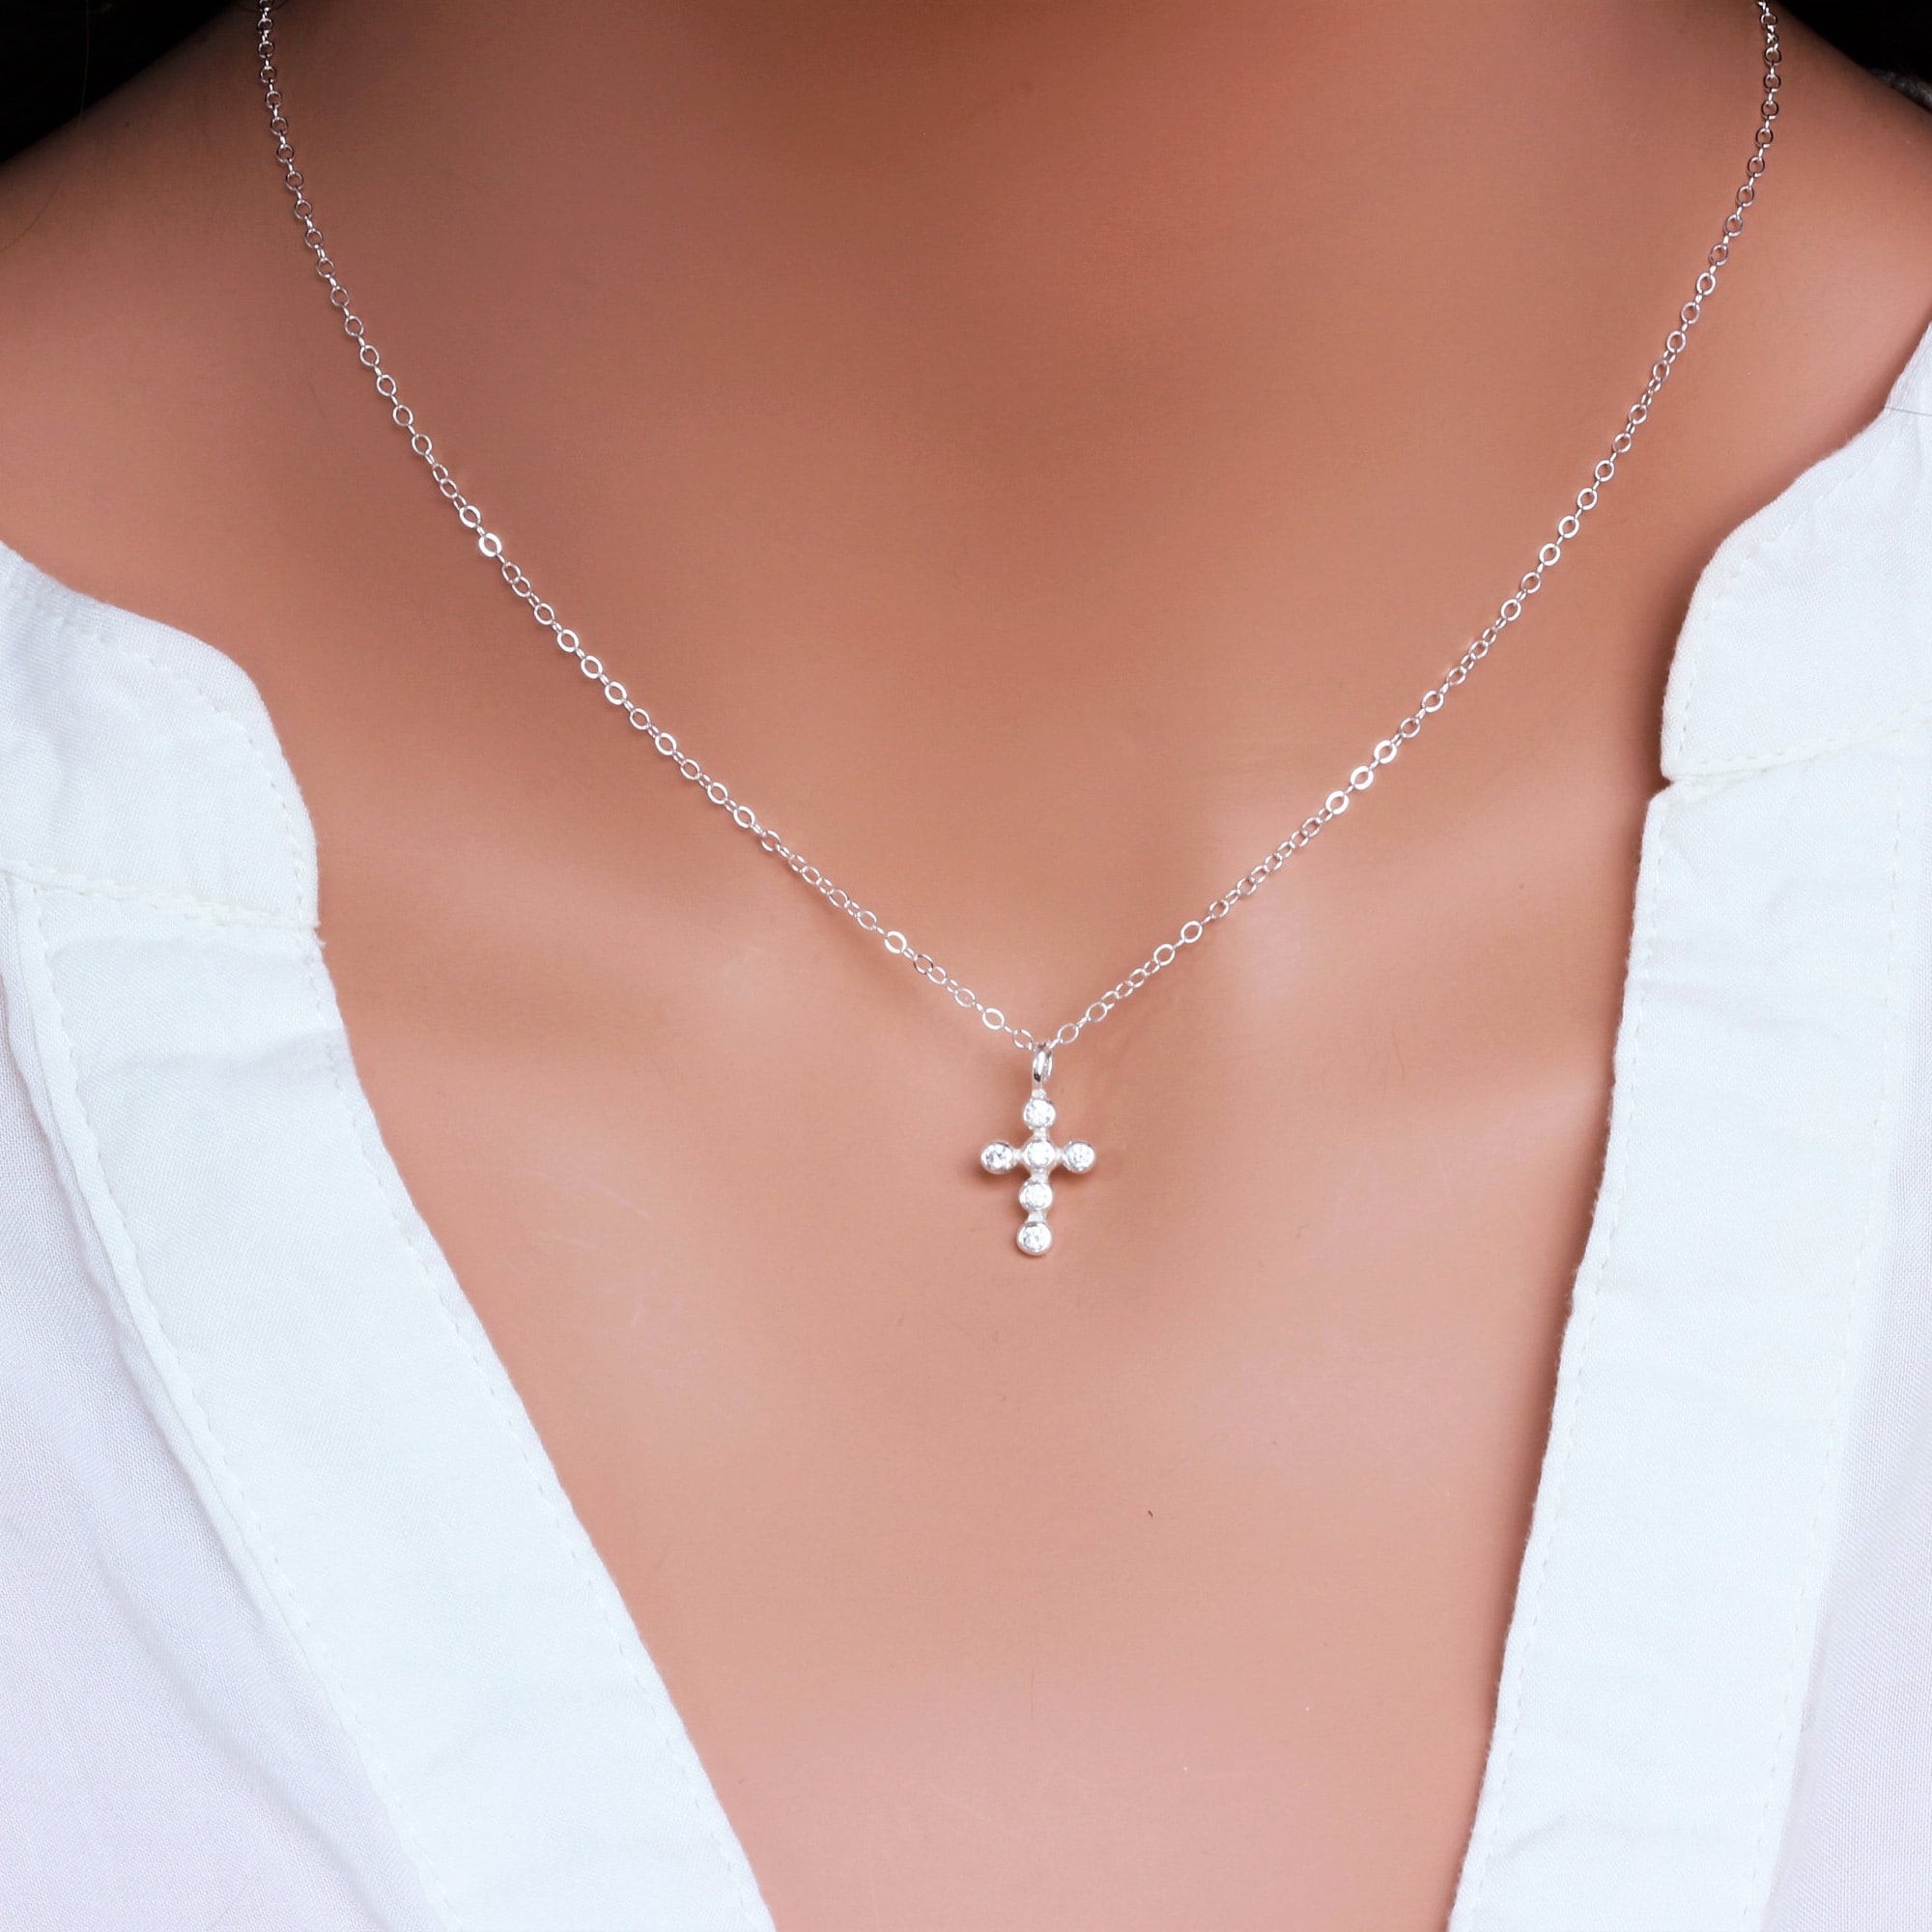 Cross Necklace - CZ Cross Necklace - Sterling silver Cross necklace pendent  - Cross necklace women -Religion jewelry -Sister gift - Mom gift